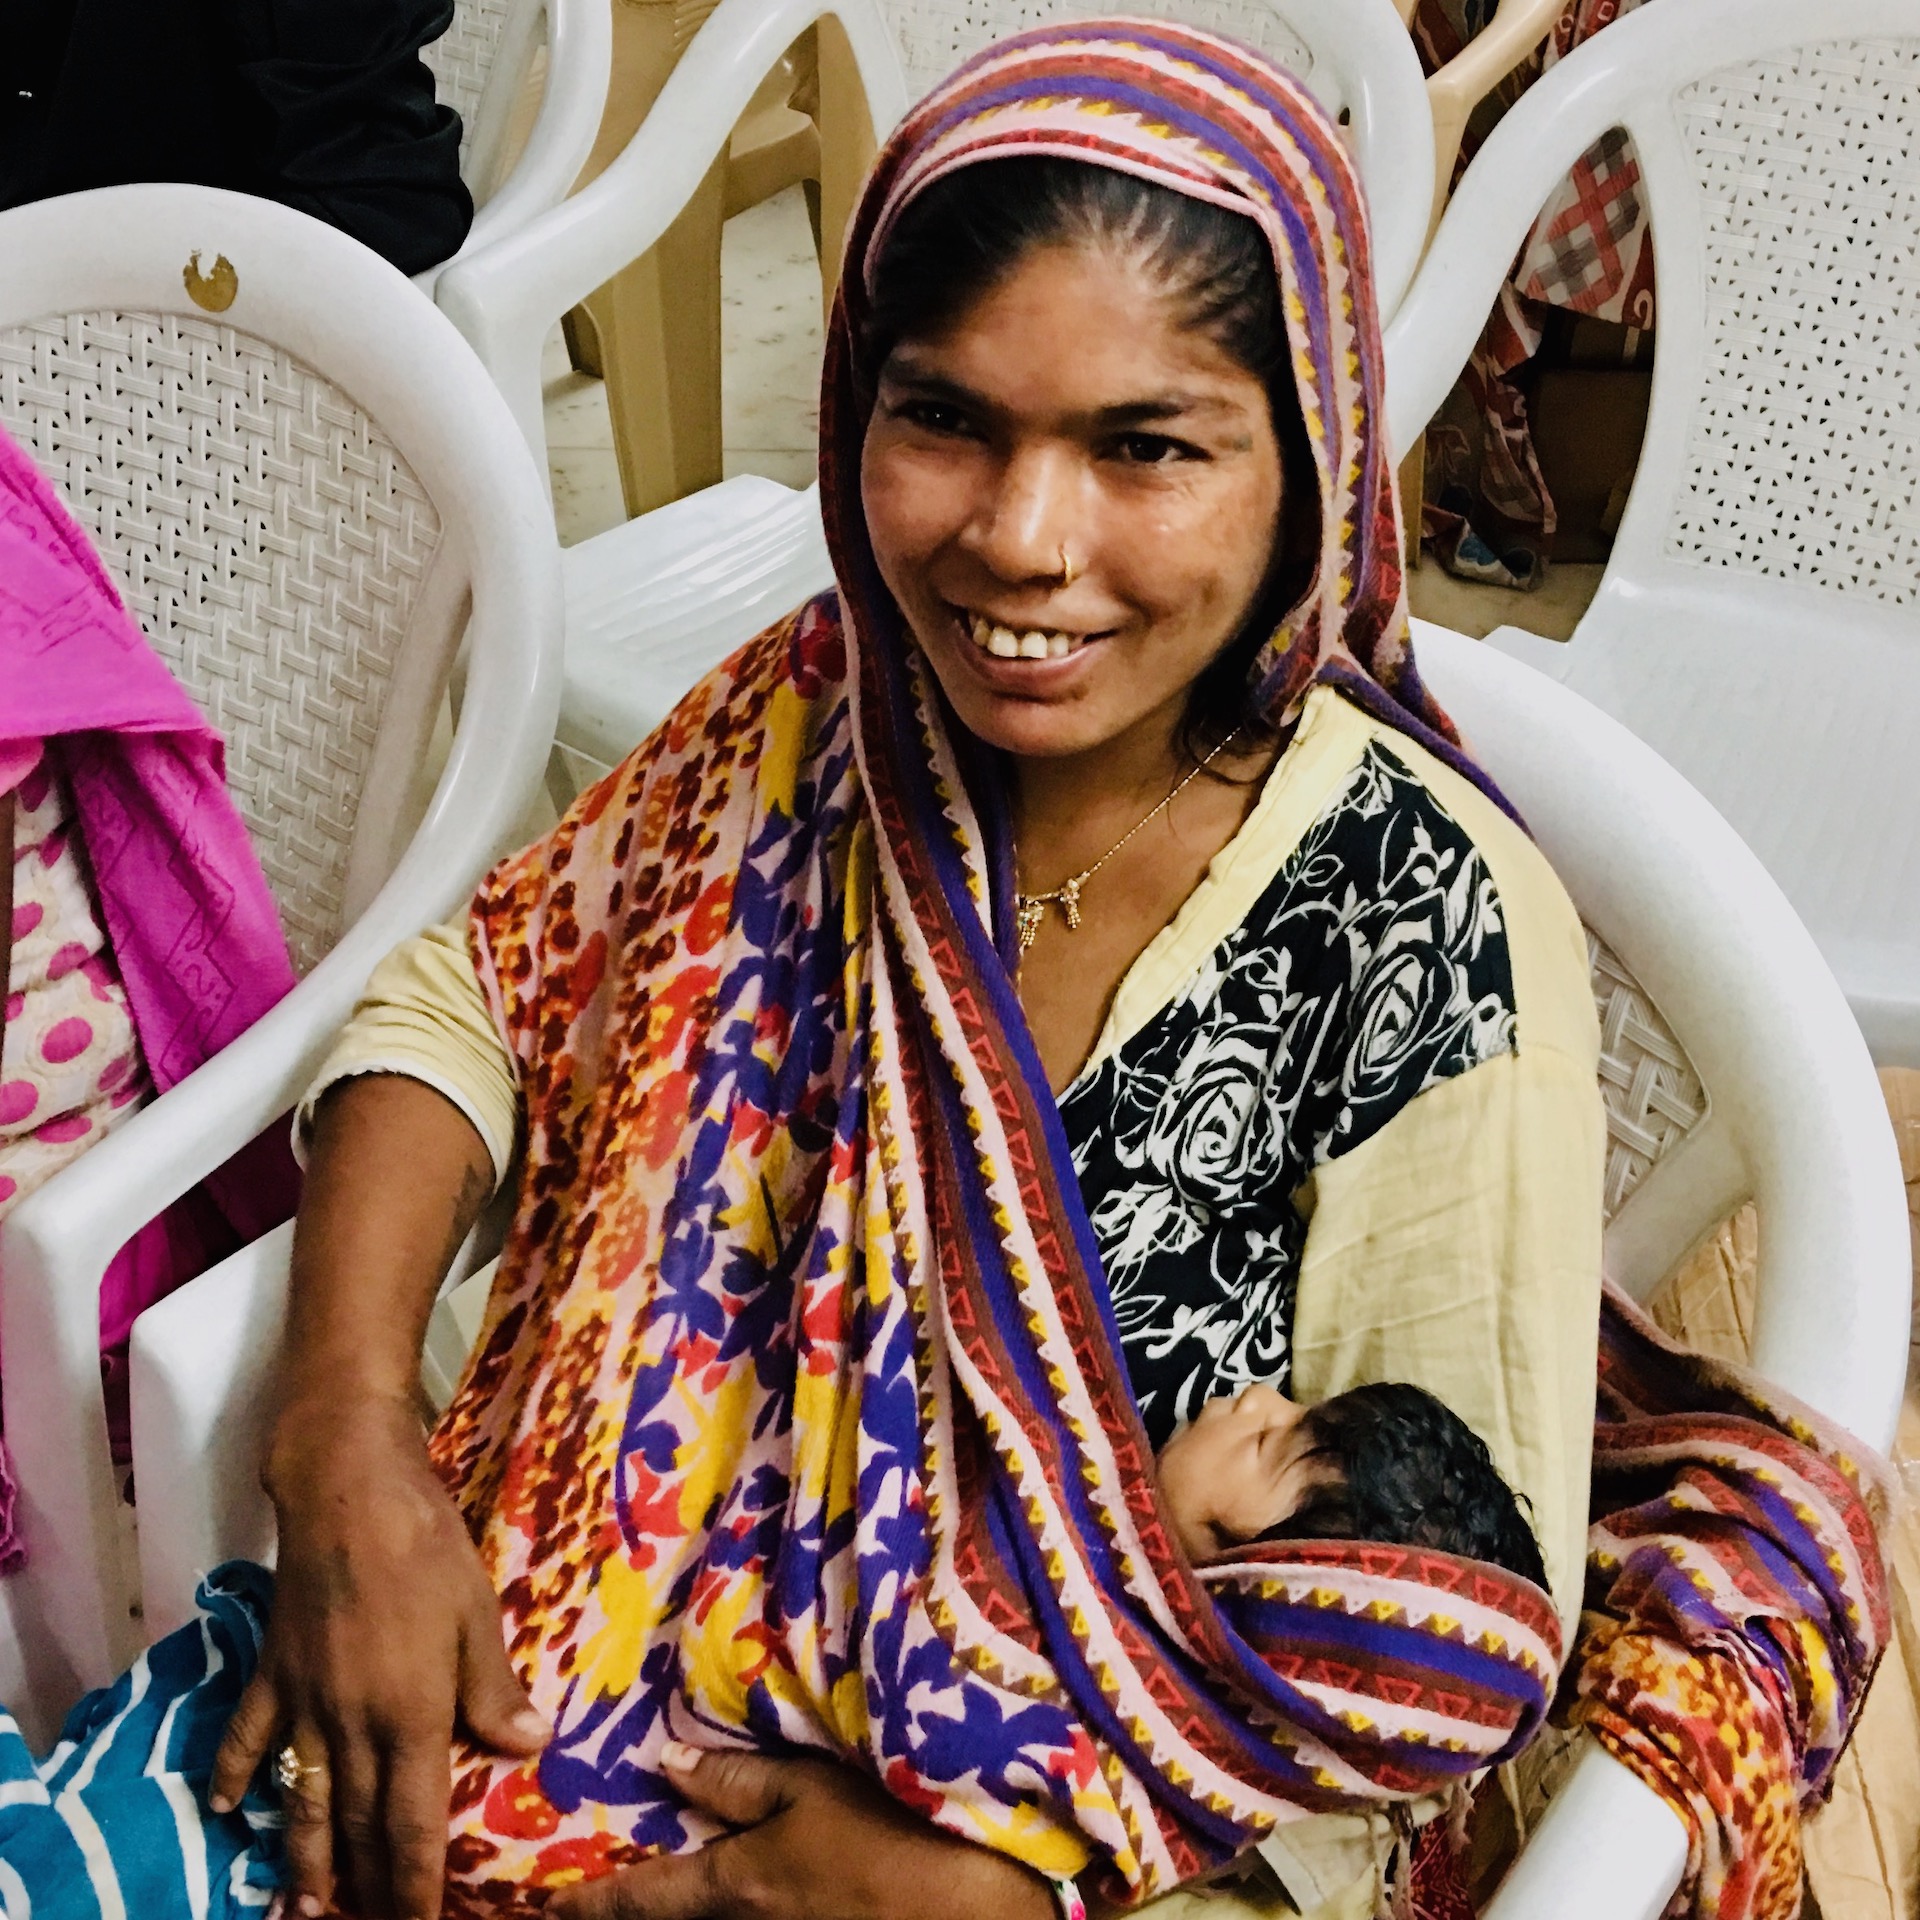 Recently one homeless woman lost her newborn baby, but she prayed in Jesus’ name and the baby came back to life! This miracle has become a great testimony and strengthened the faith of many people.